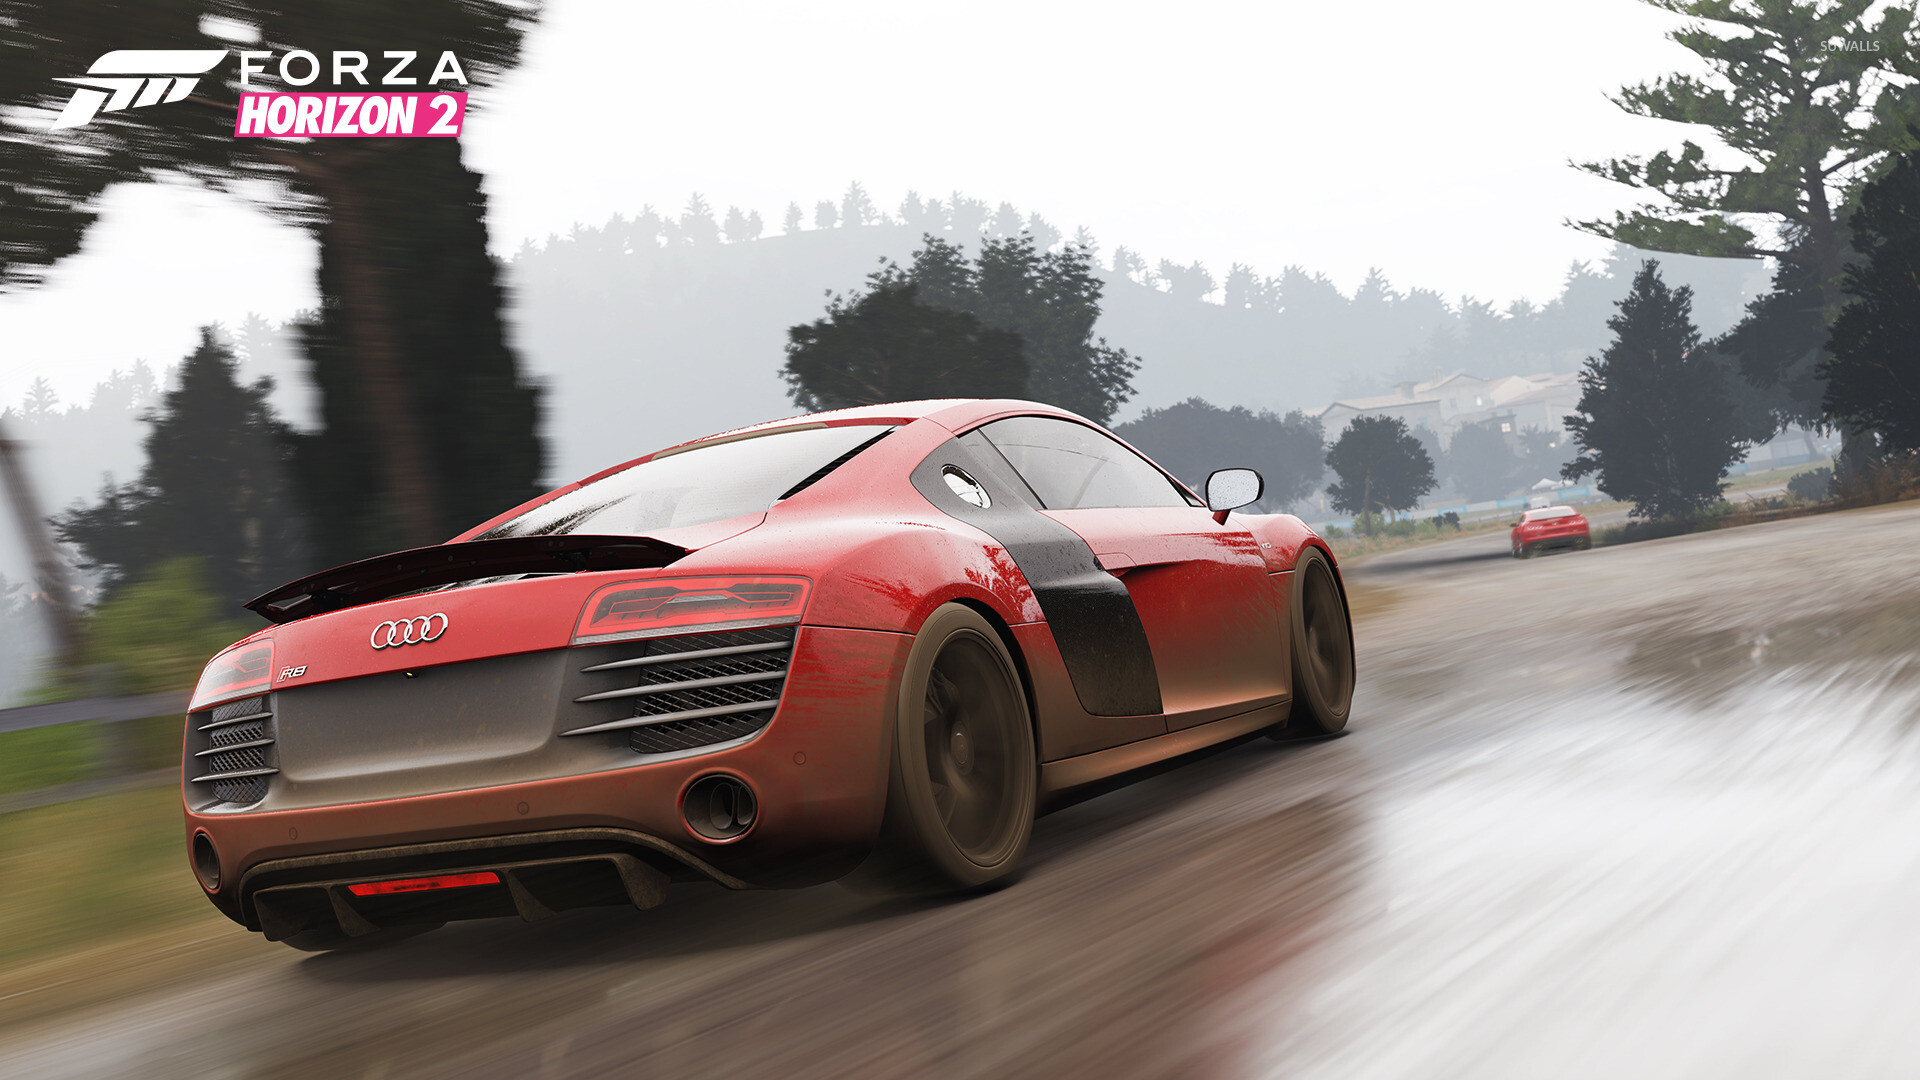 Forza Horizon: An 2014 epic, open-world racer, The sequel to 2012's FH. 1920x1080 Full HD Wallpaper.